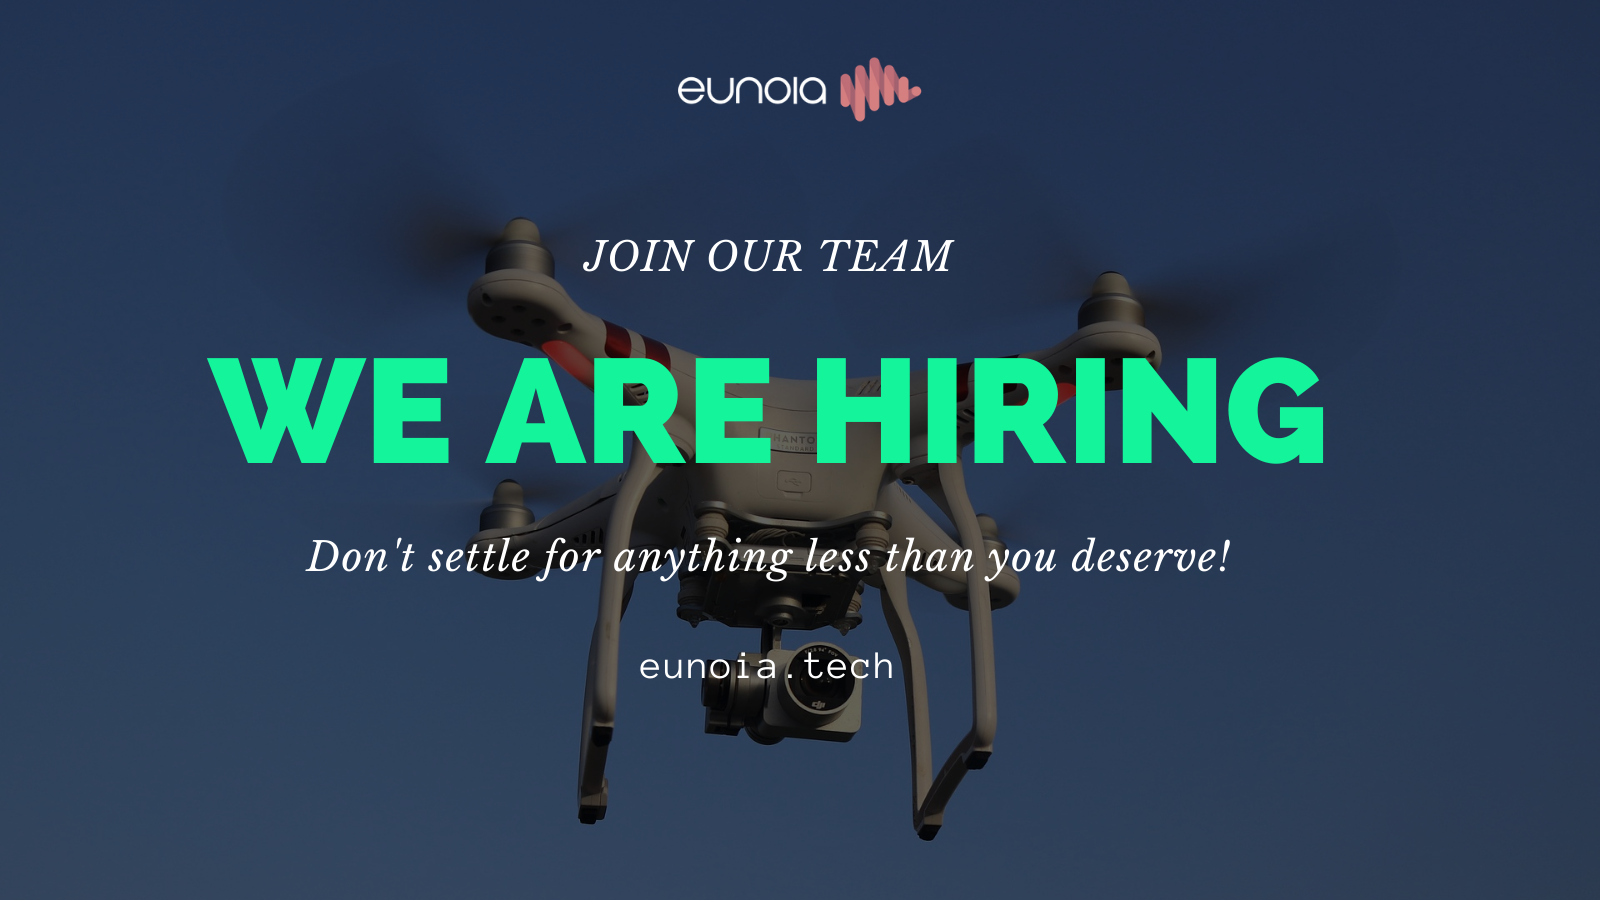 Eunoia extends it's team in Cyprus